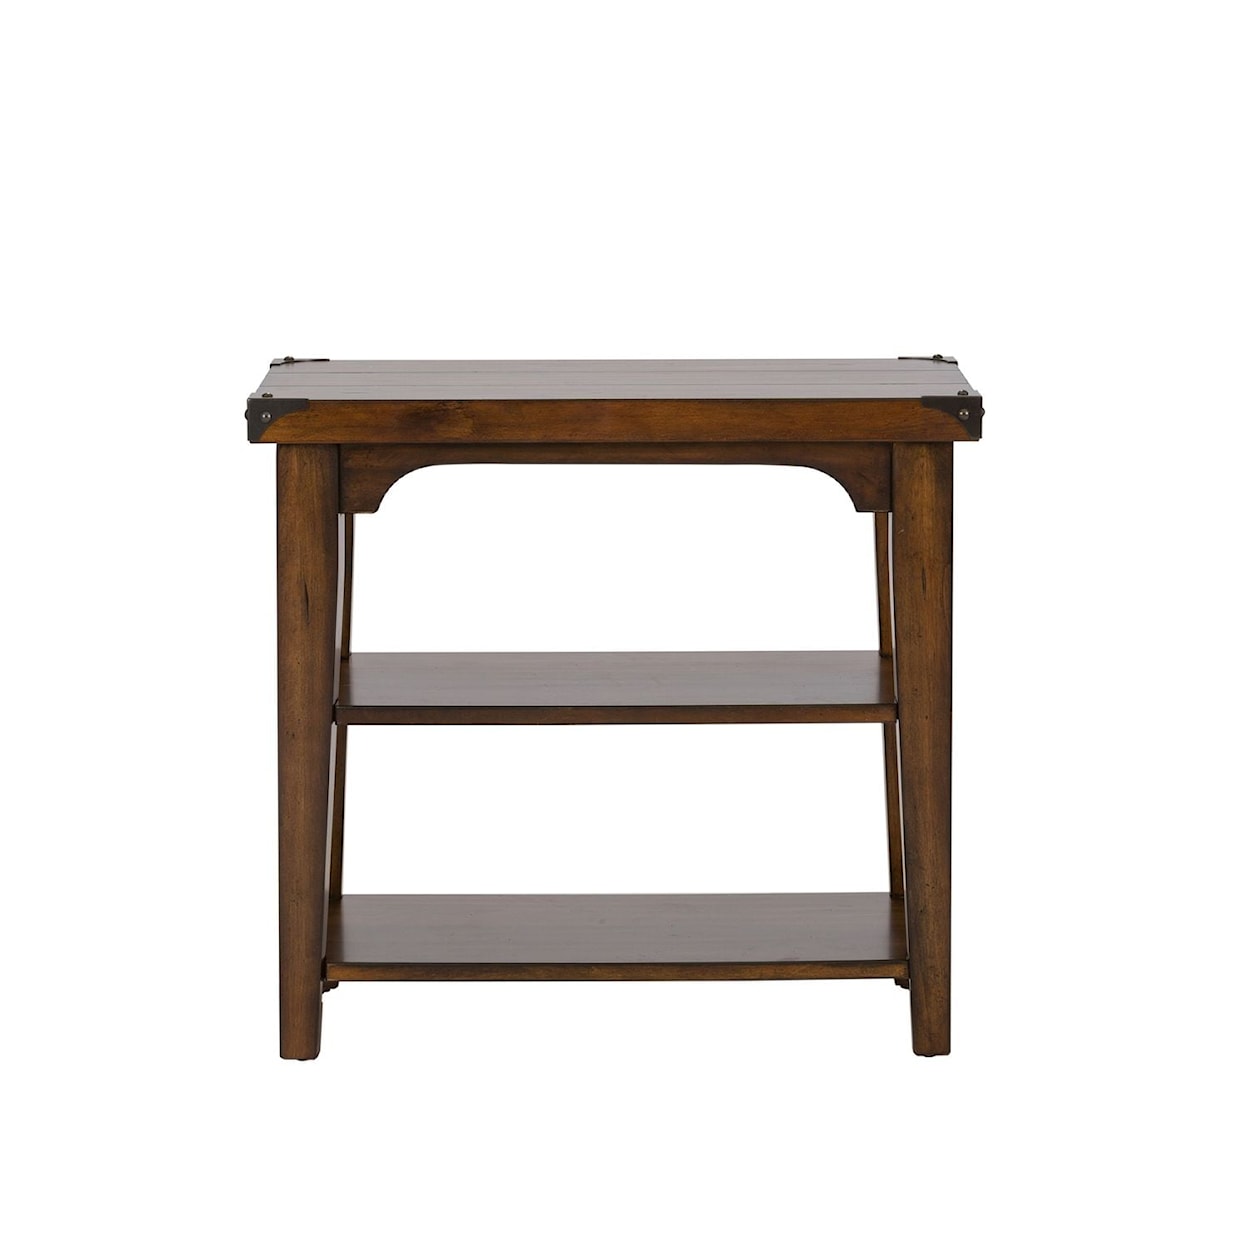 Libby Aspen Skies Chairside End Table